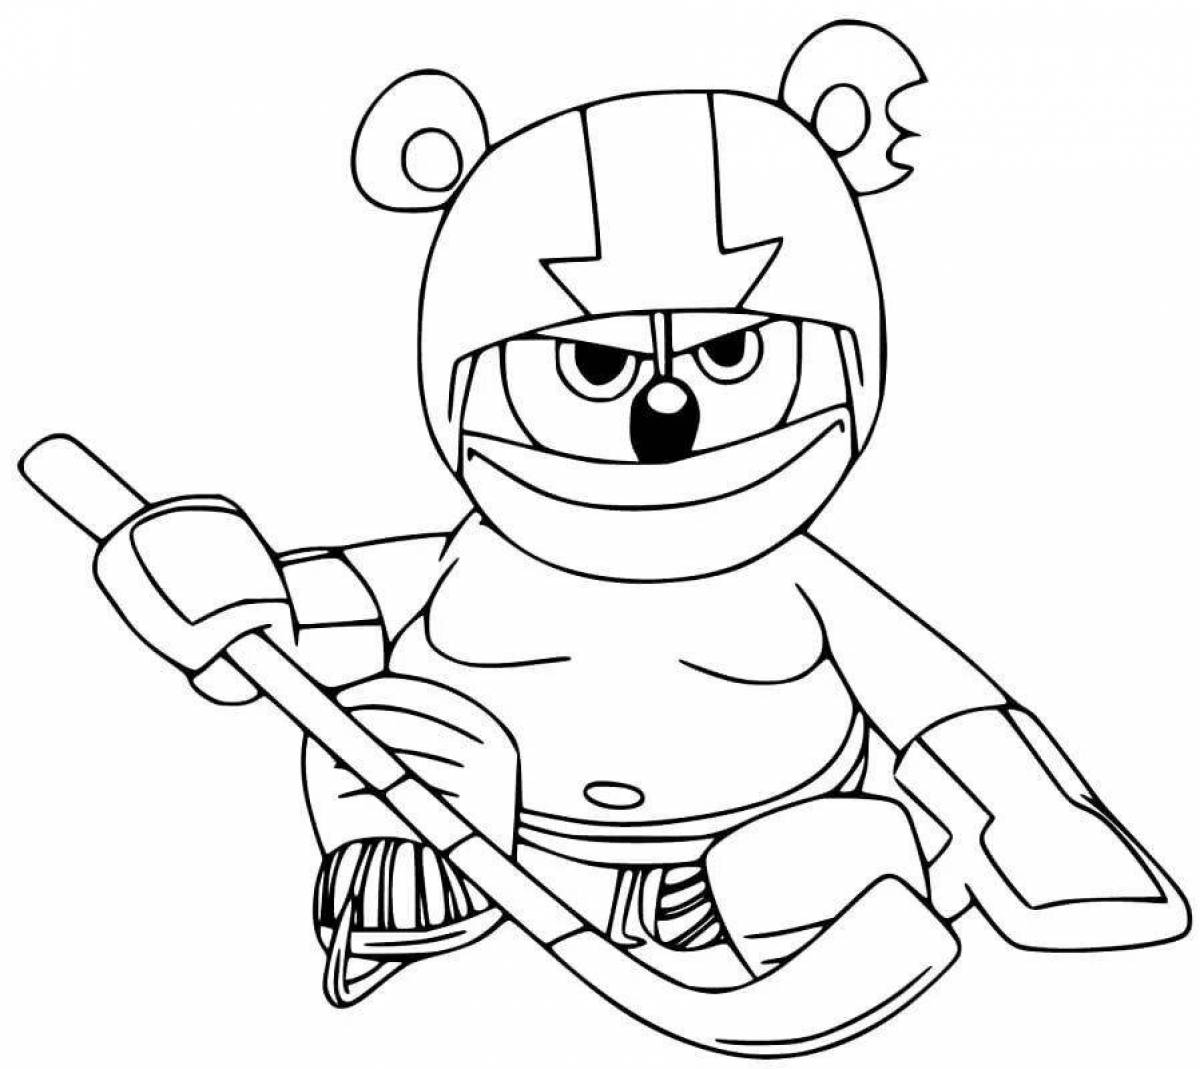 Amazing Humber Bear Coloring Page